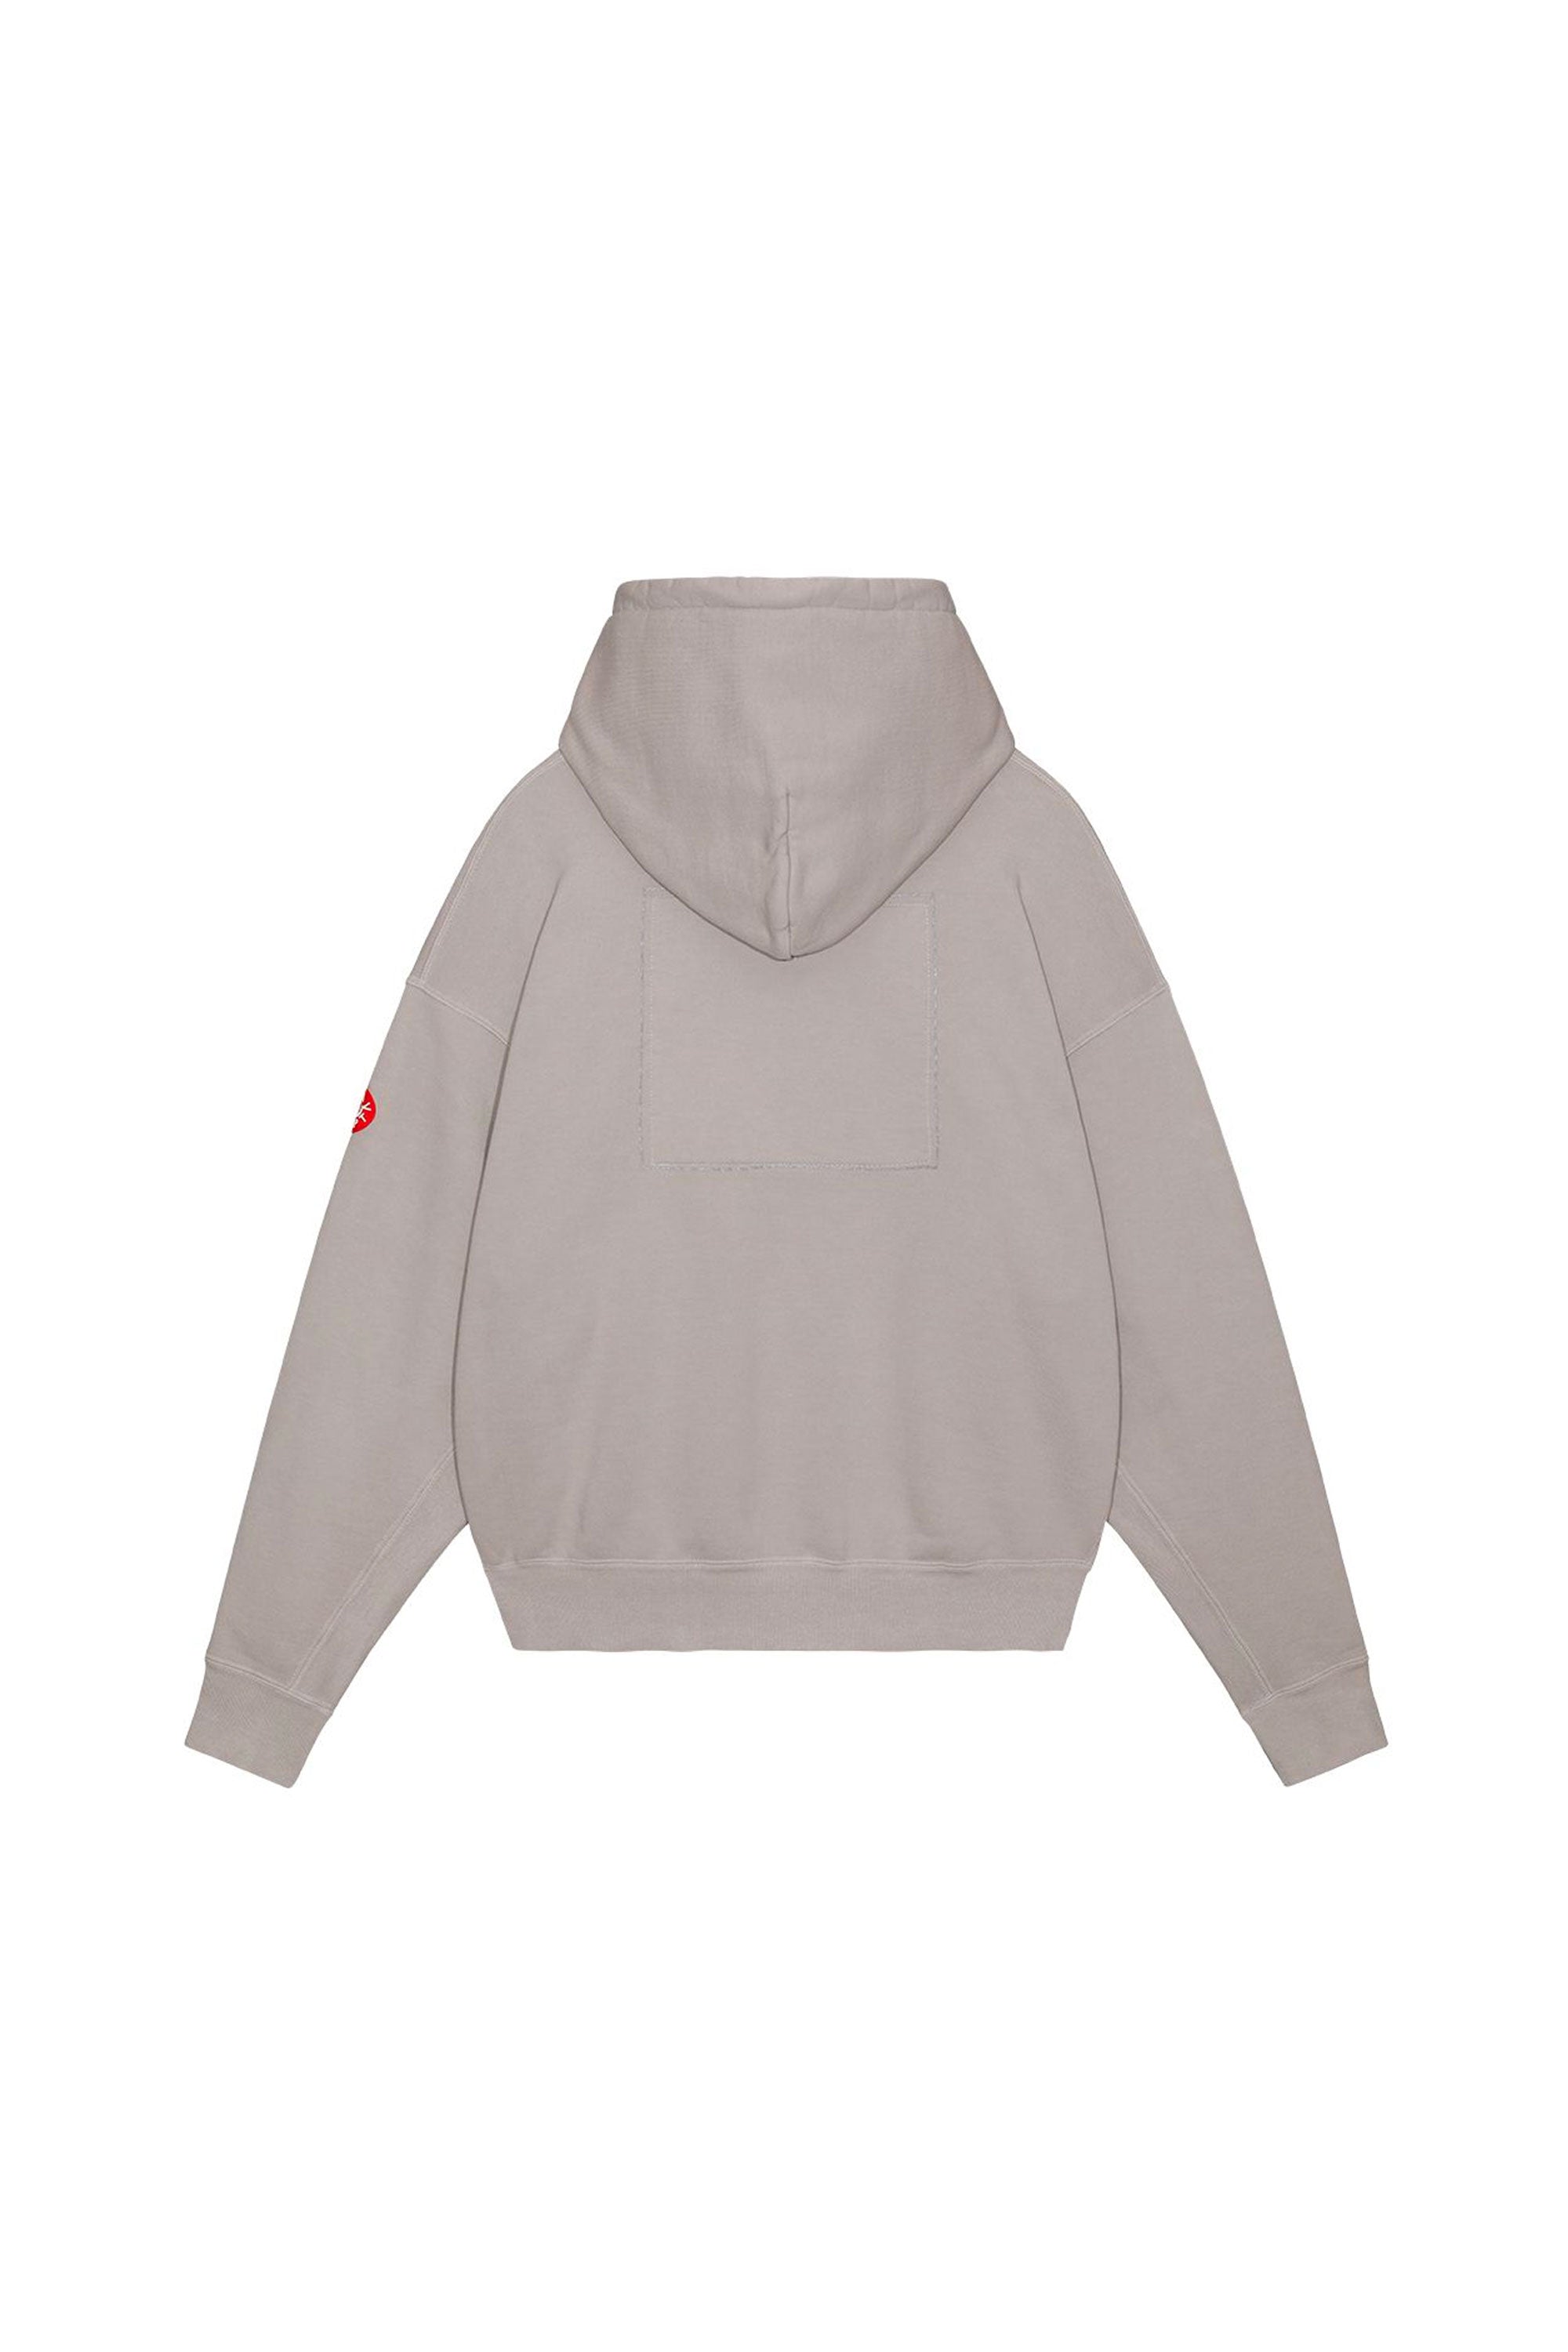 The CAV EMPT - OVERDYE MD INPUT-HAMMER HOODY  available online with global shipping, and in PAM Stores Melbourne and Sydney.